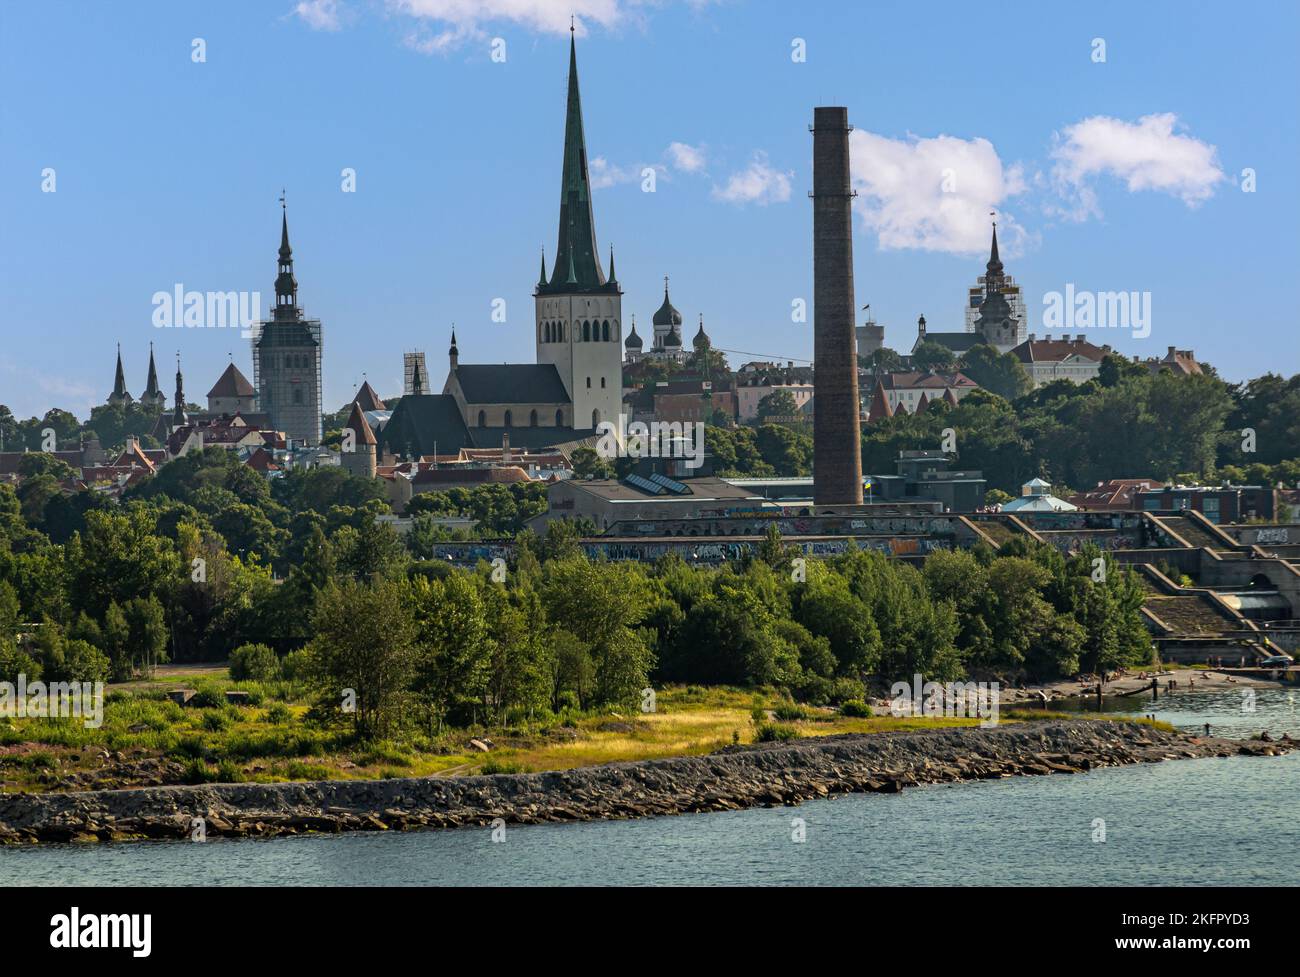 Estonia, Tallinn - July 21, 2022: Cityscape showing the towers of old town: churches, rampart lookouts, and a historic lone chimney in front under blu Stock Photo